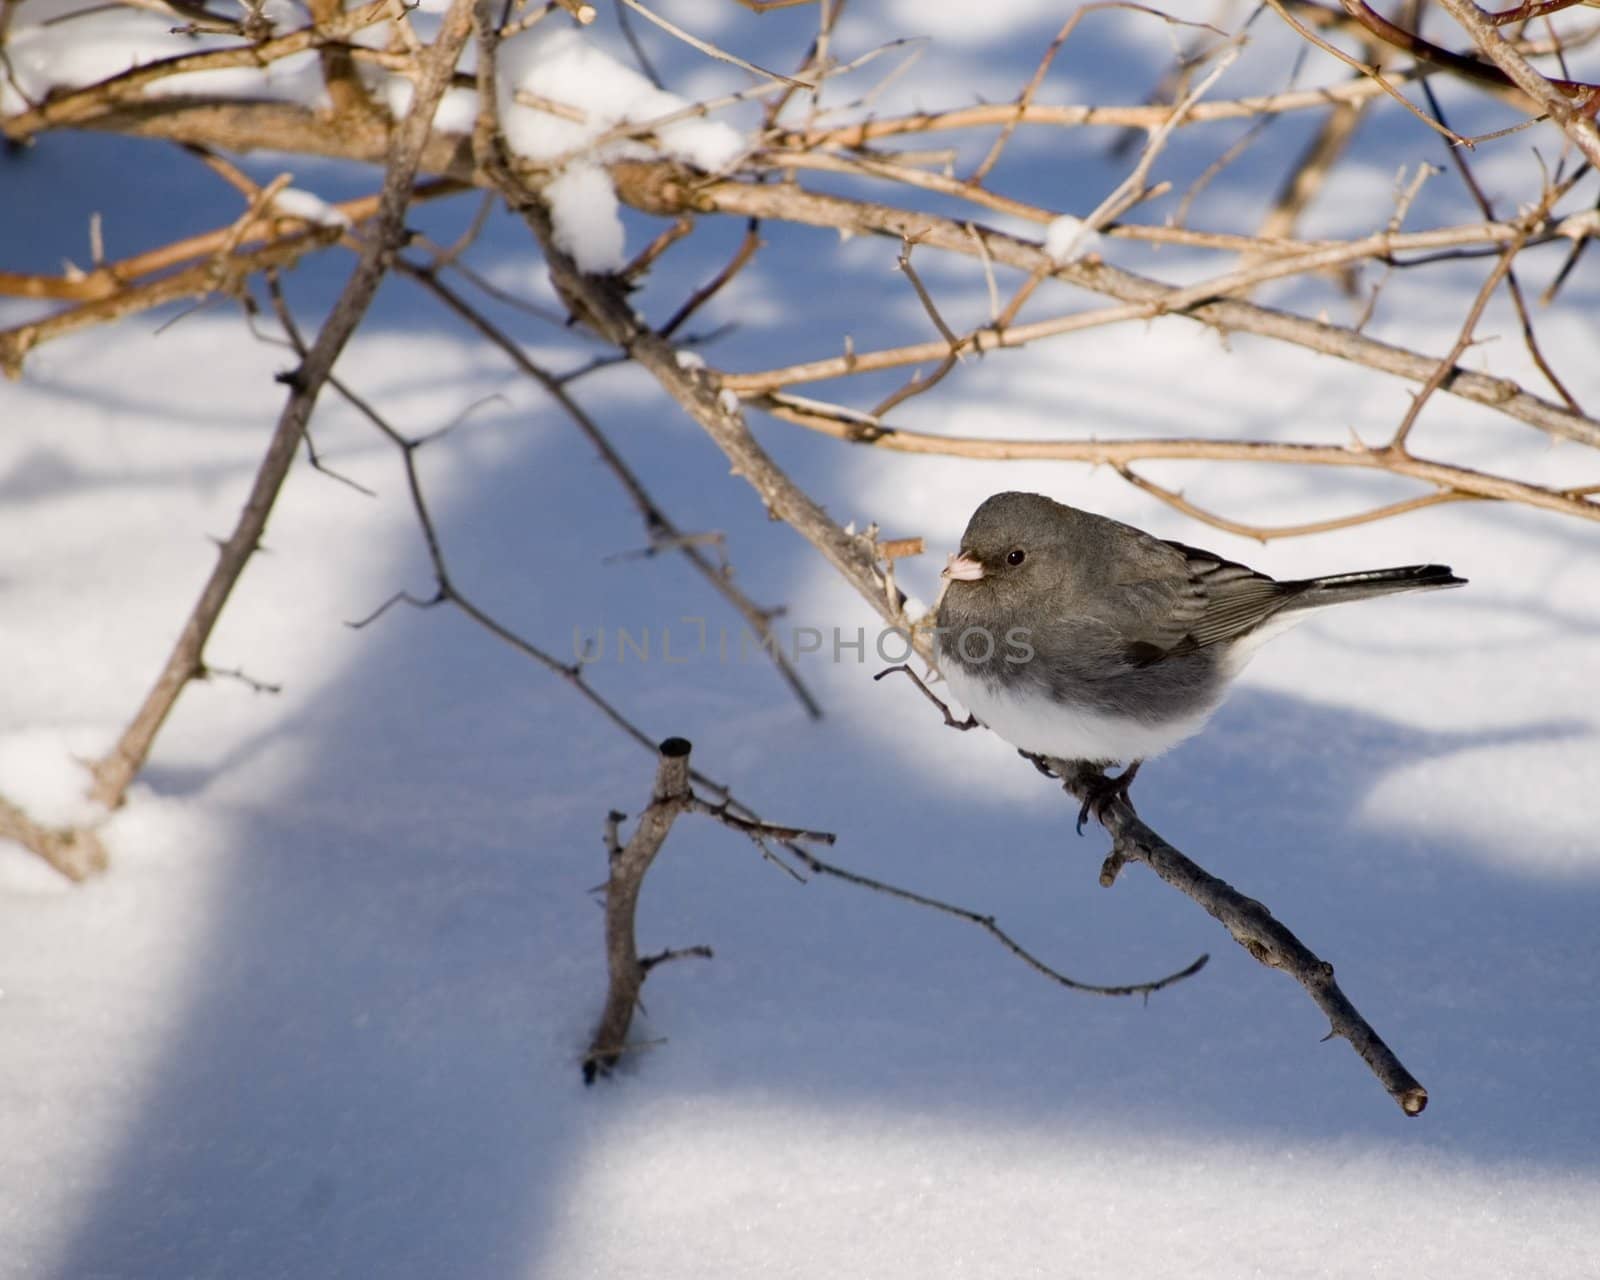 A slate-colored junco perched on twig in winter snow.